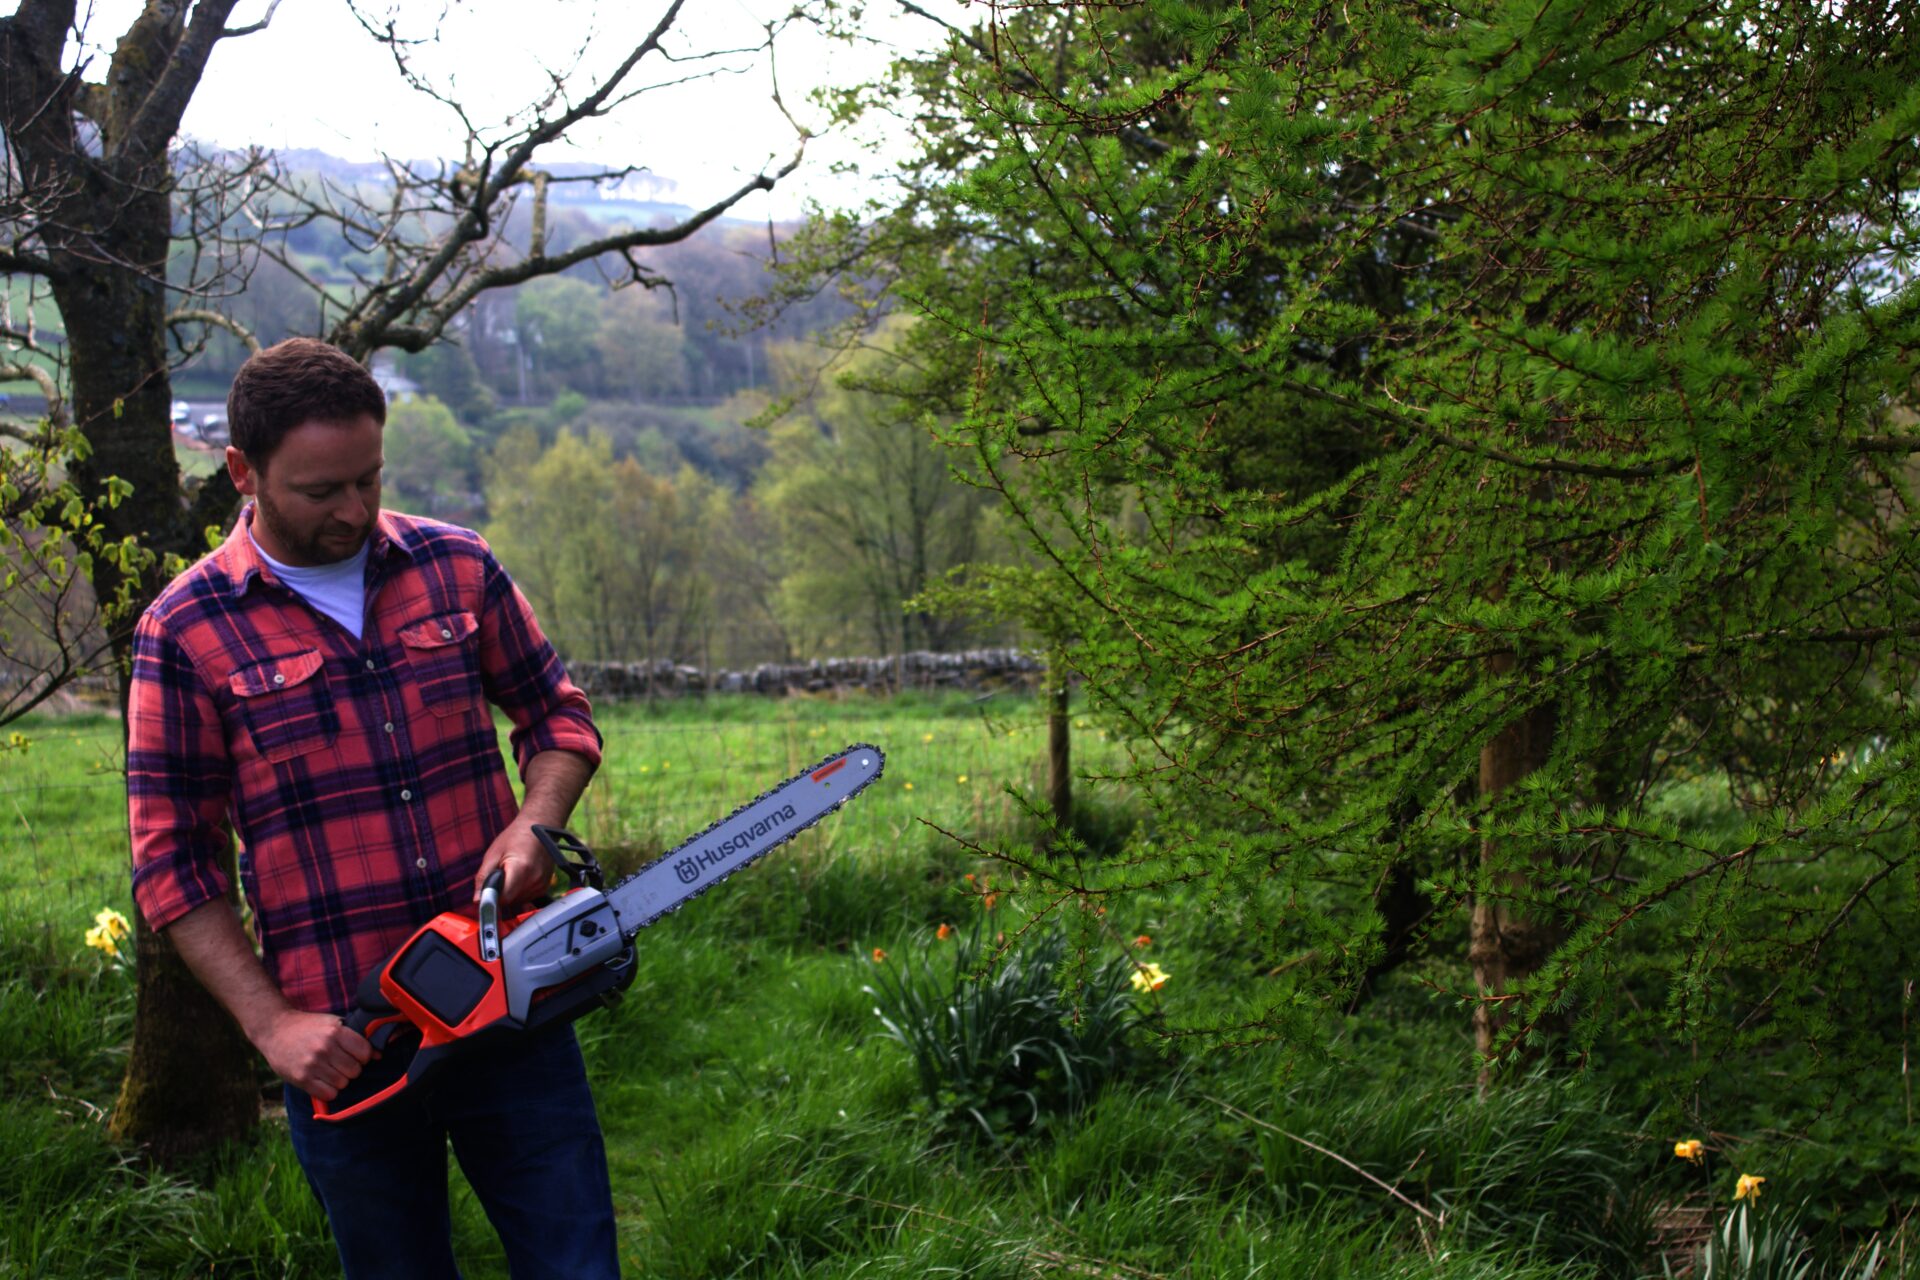 Overview: Husqvarna 540i XP battery powered chainsaw